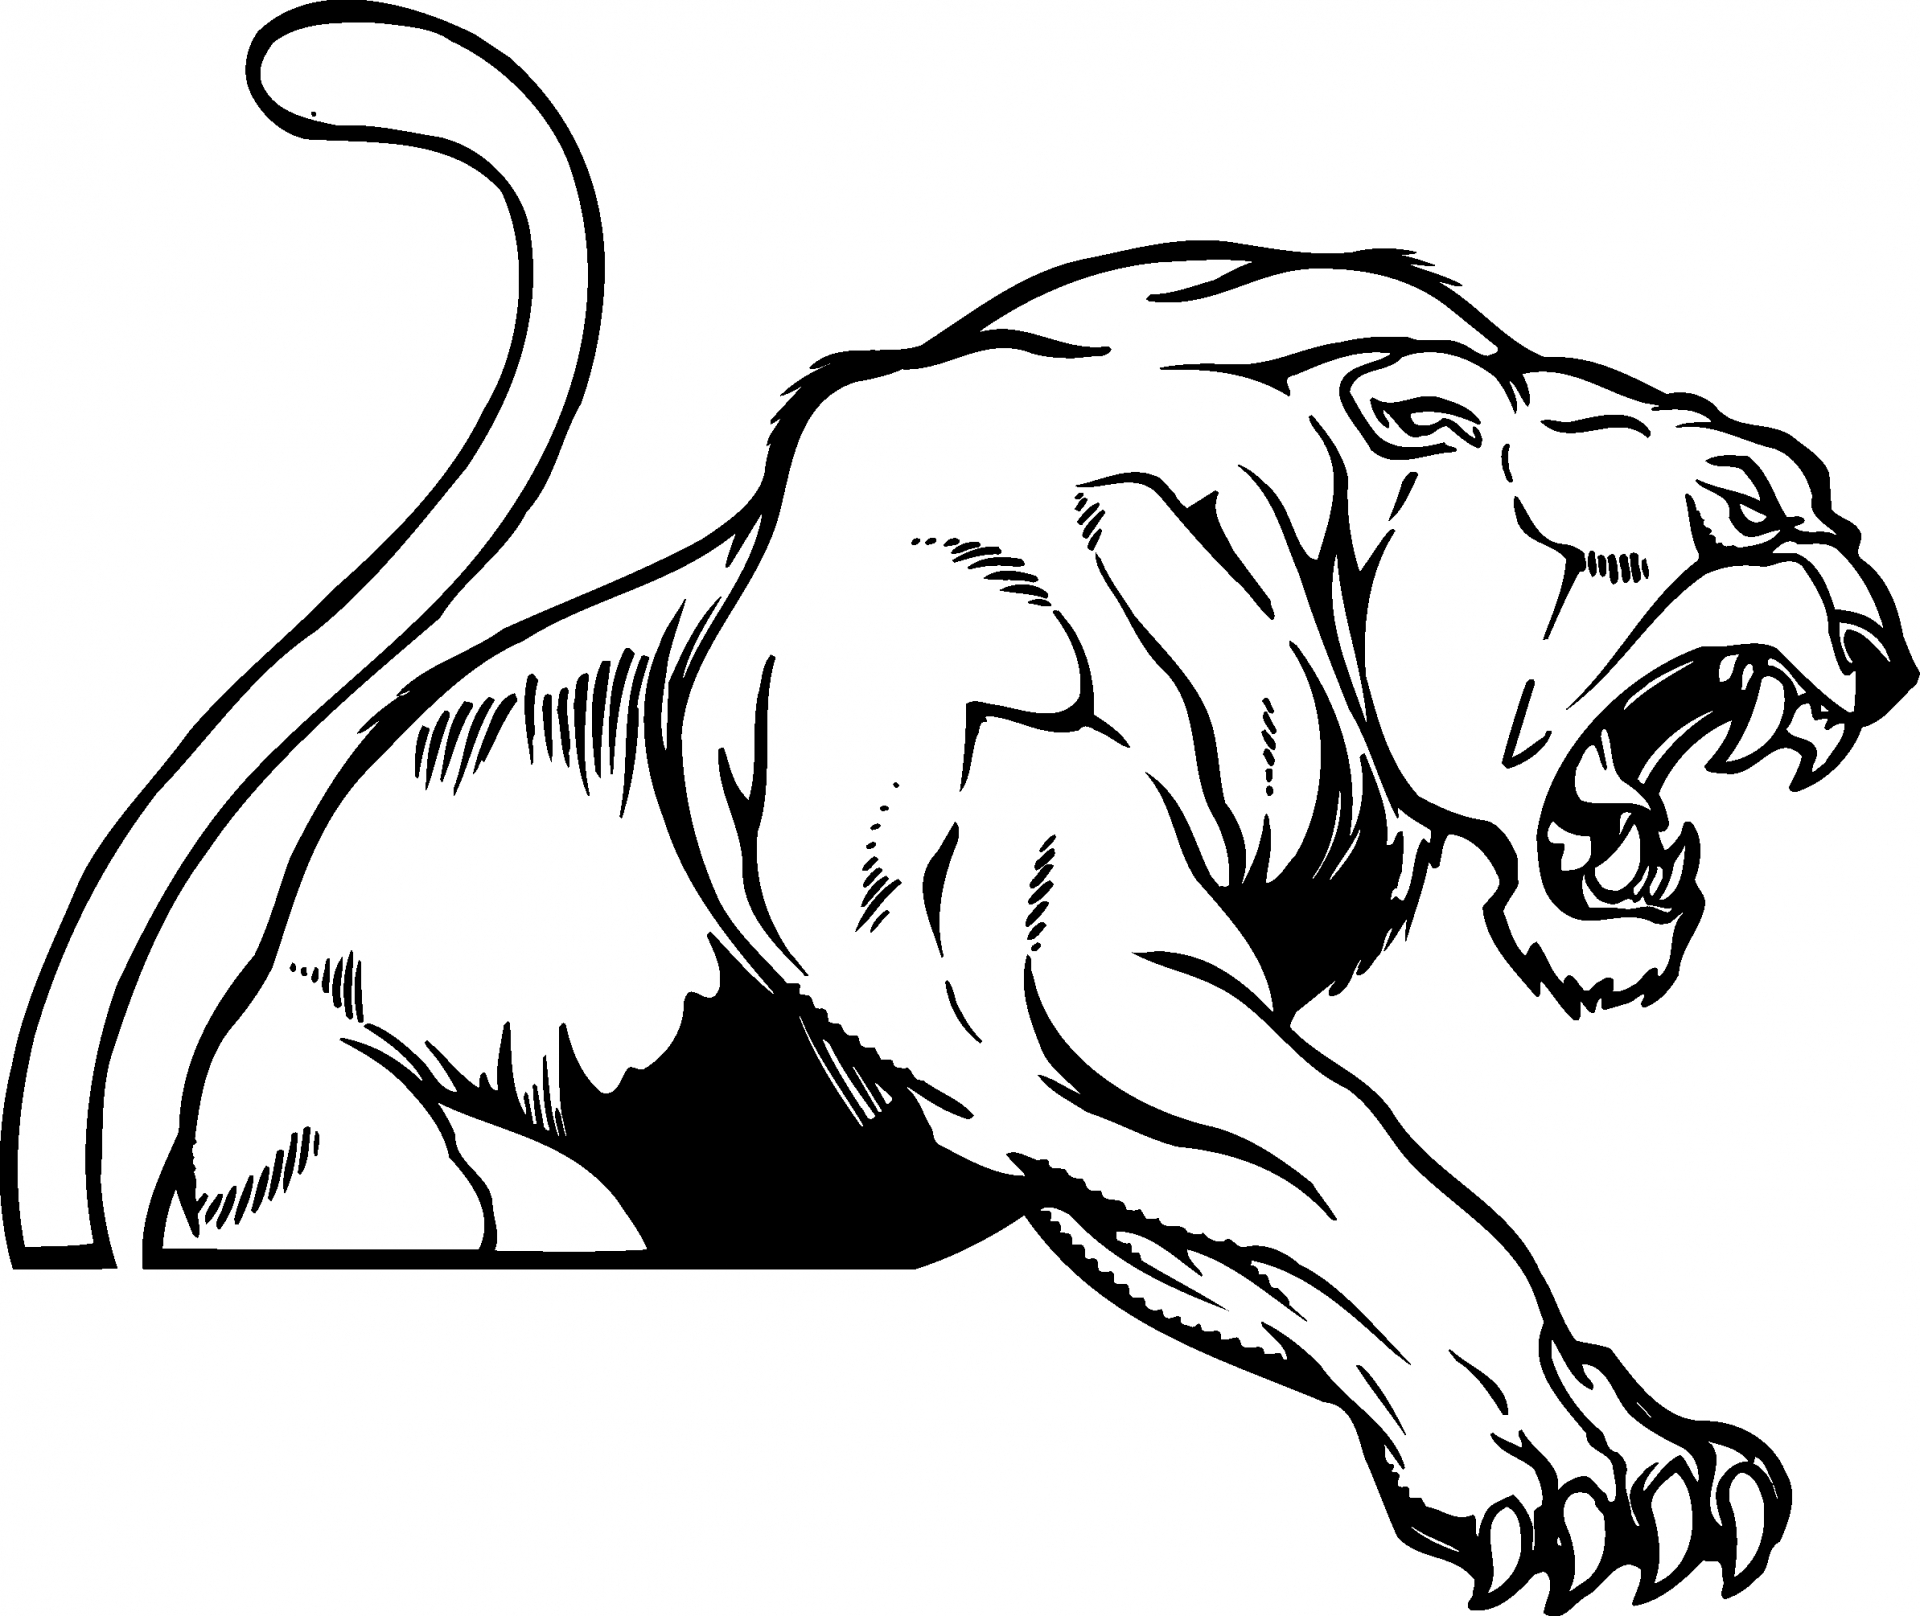 Panther mascot clip art use to - Free Clipart Images